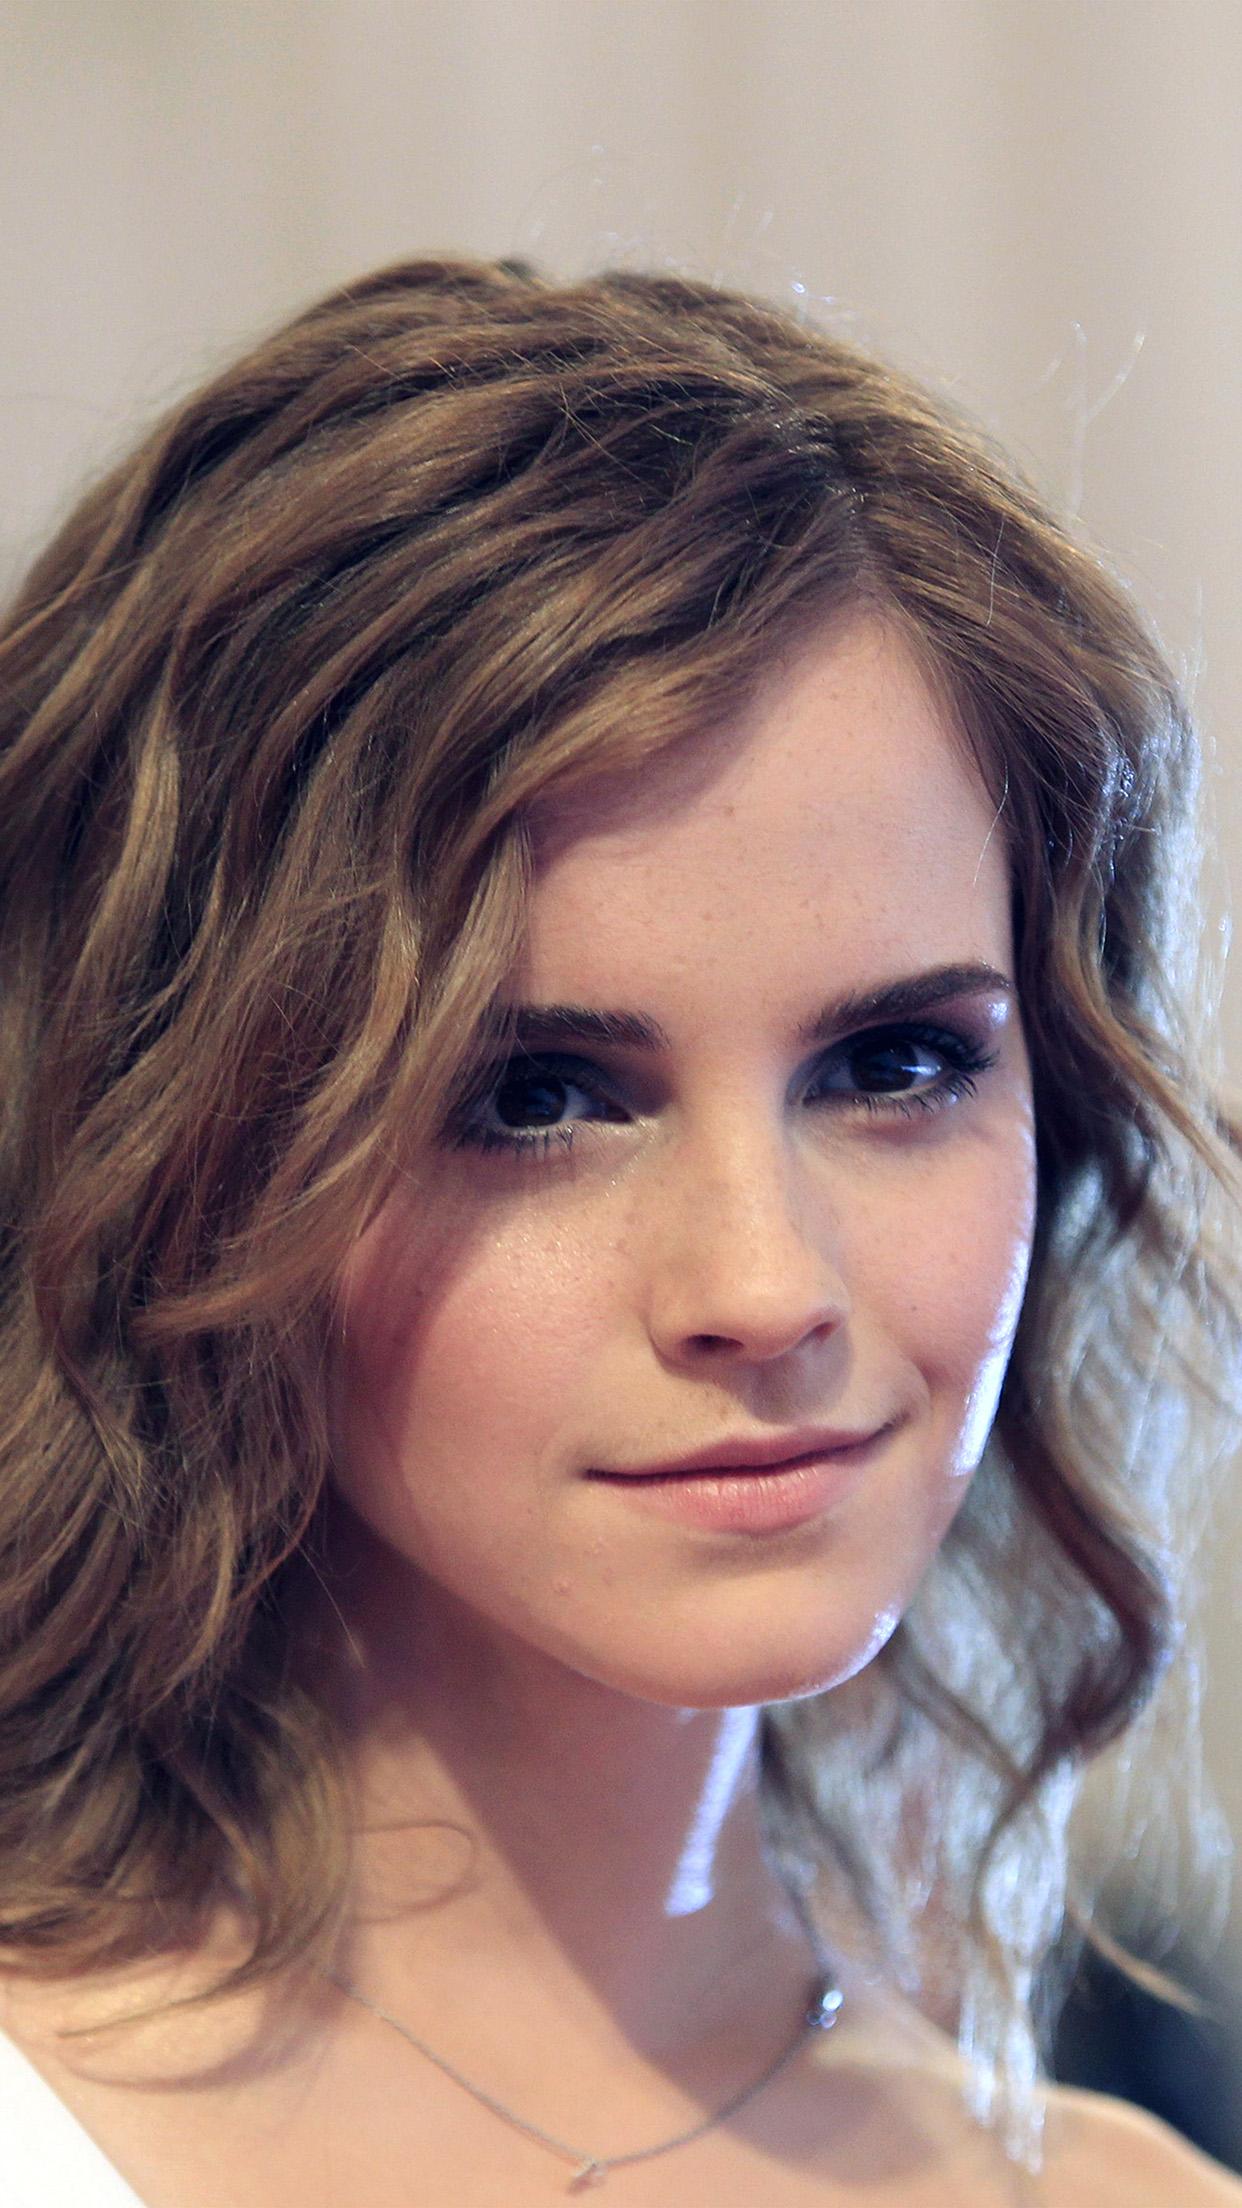 Emma Watson Face Actress Celebrity Android wallpaper HD